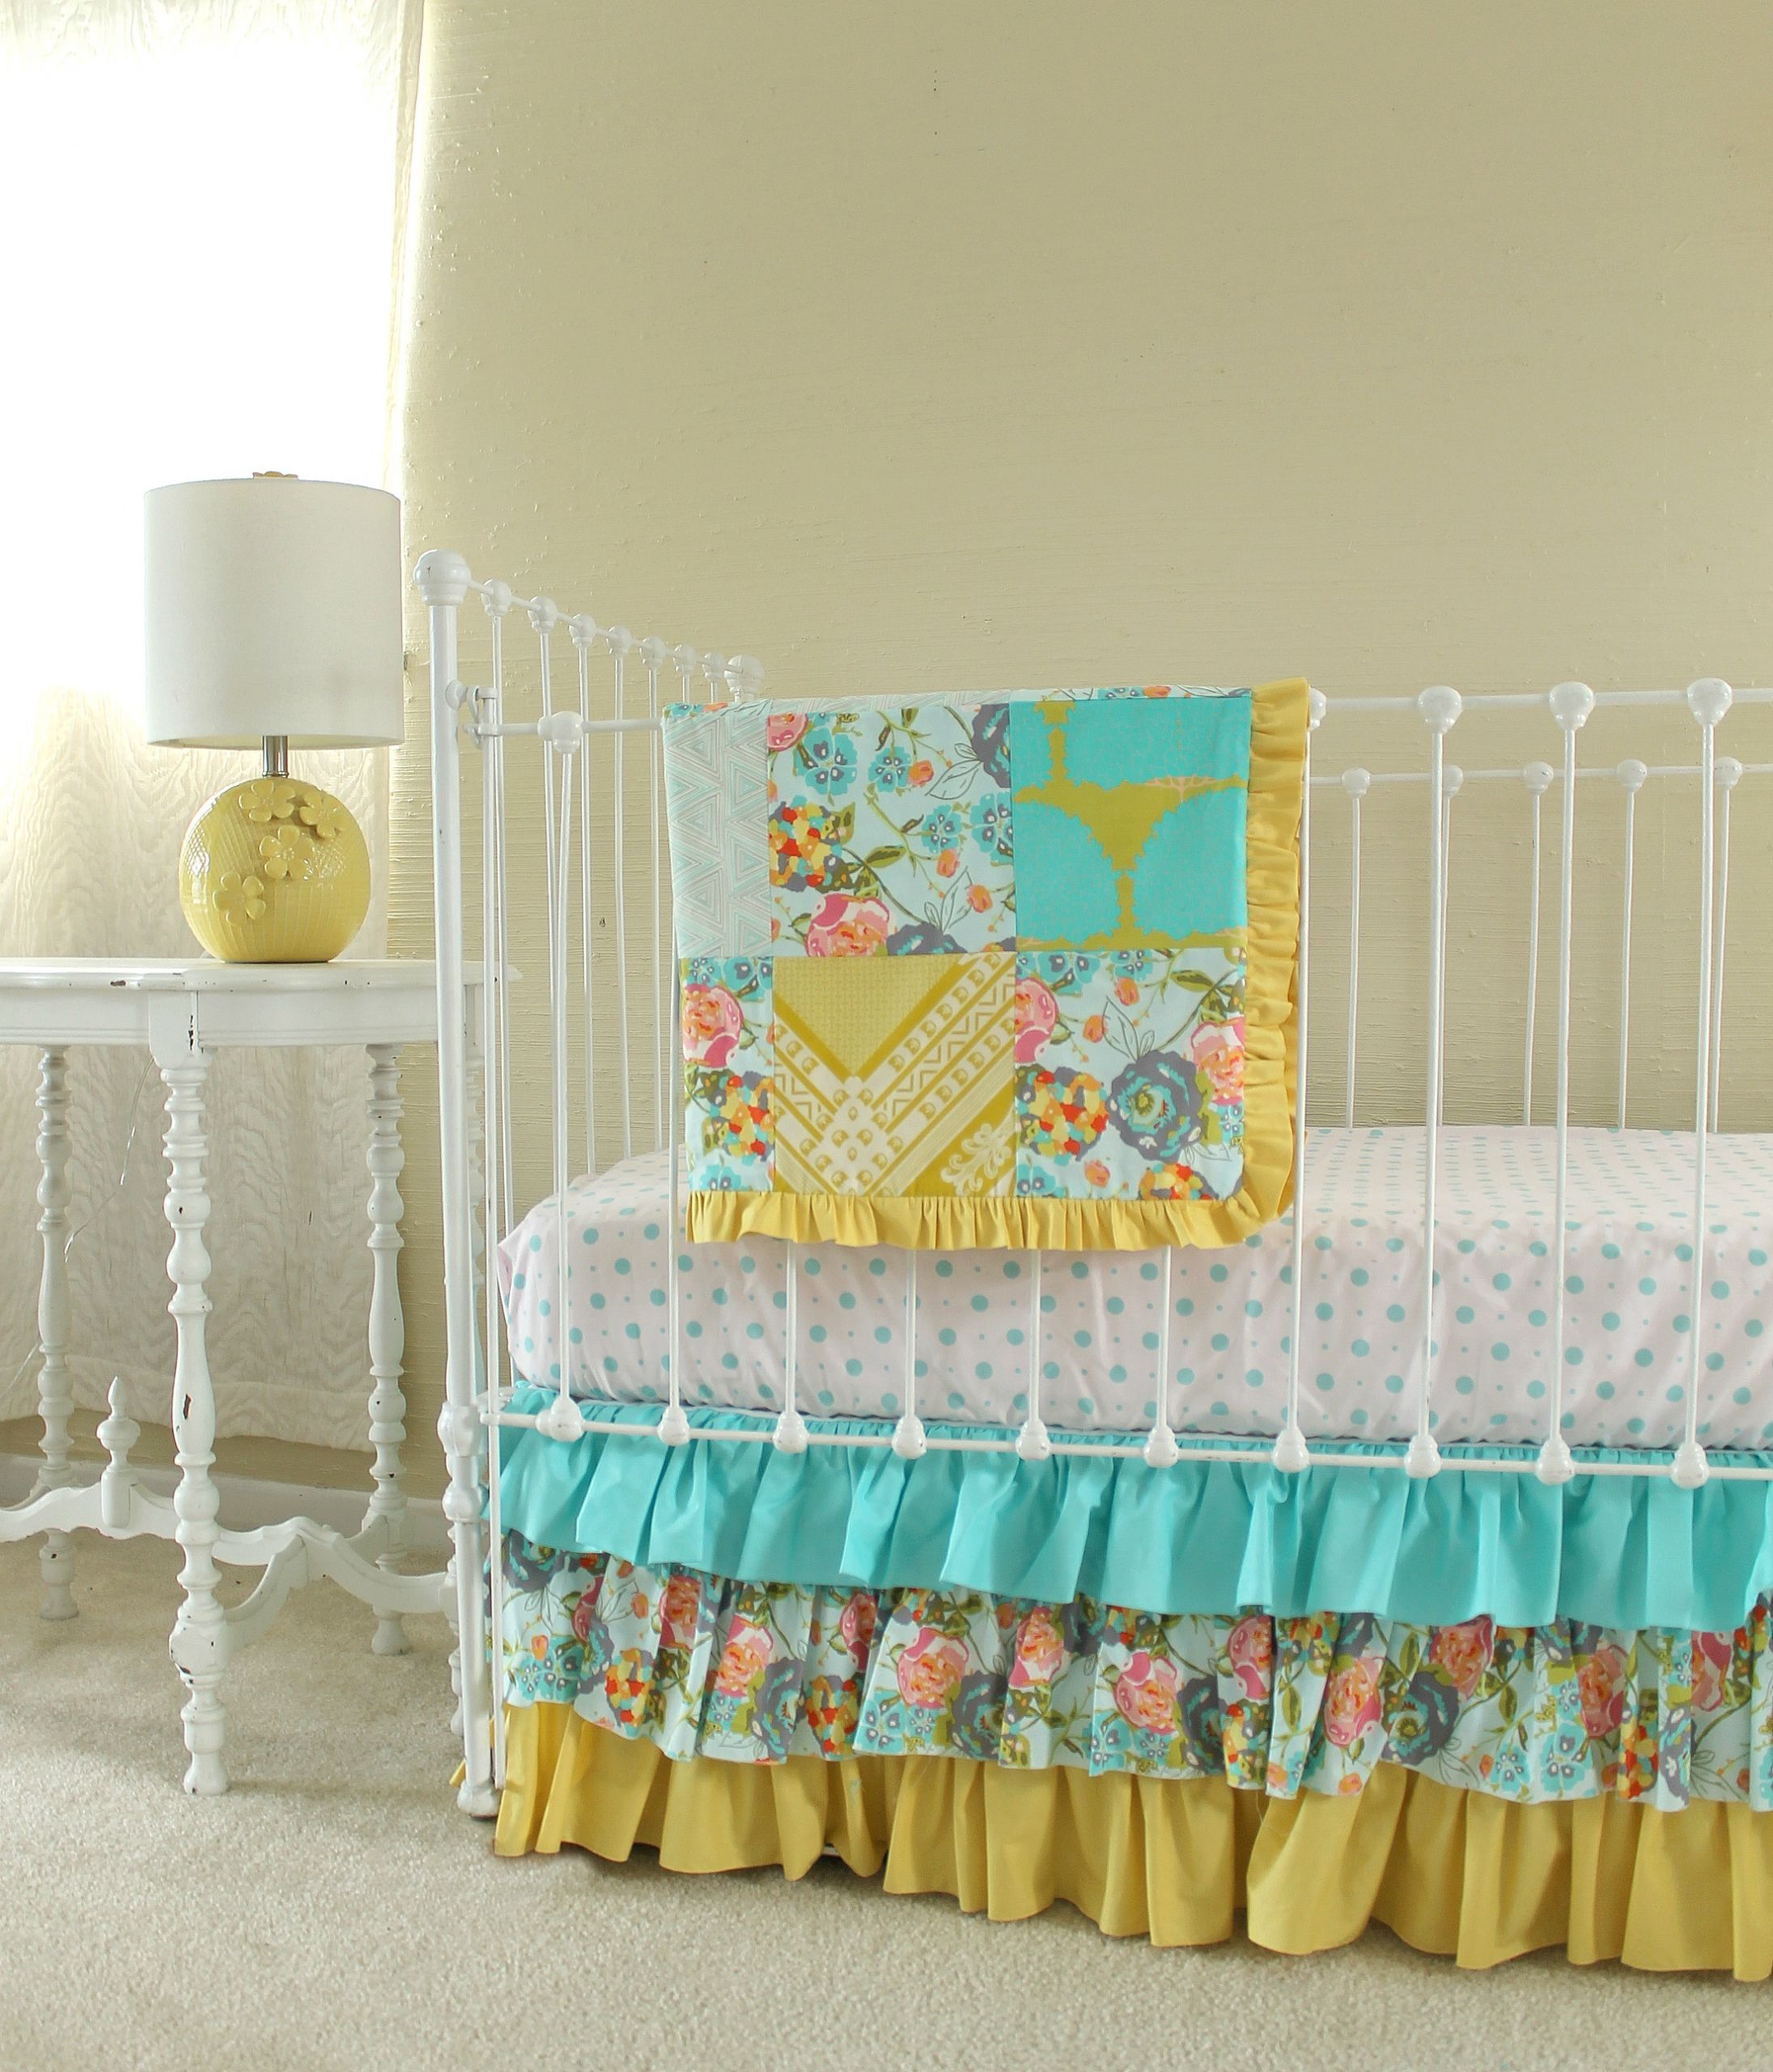 Belle Baby Bedding And Decor
 Lily Belle Blend Baby Bedding Lottie Da Baby